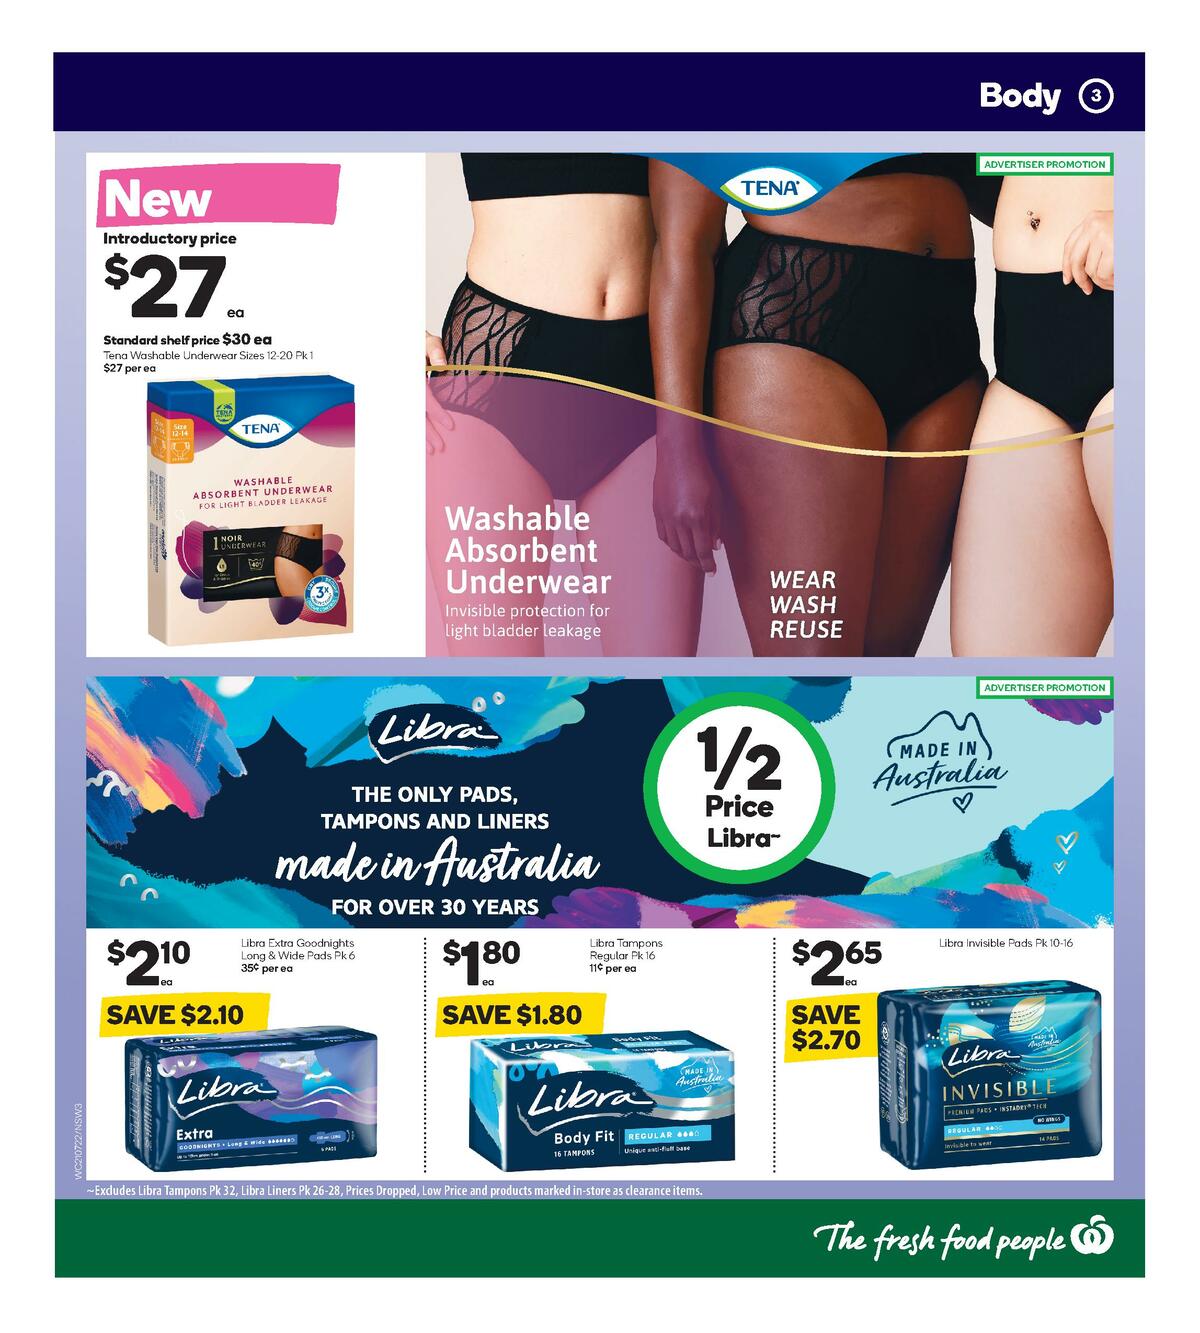 Woolworths Health & Beauty Catalogues from 21 July